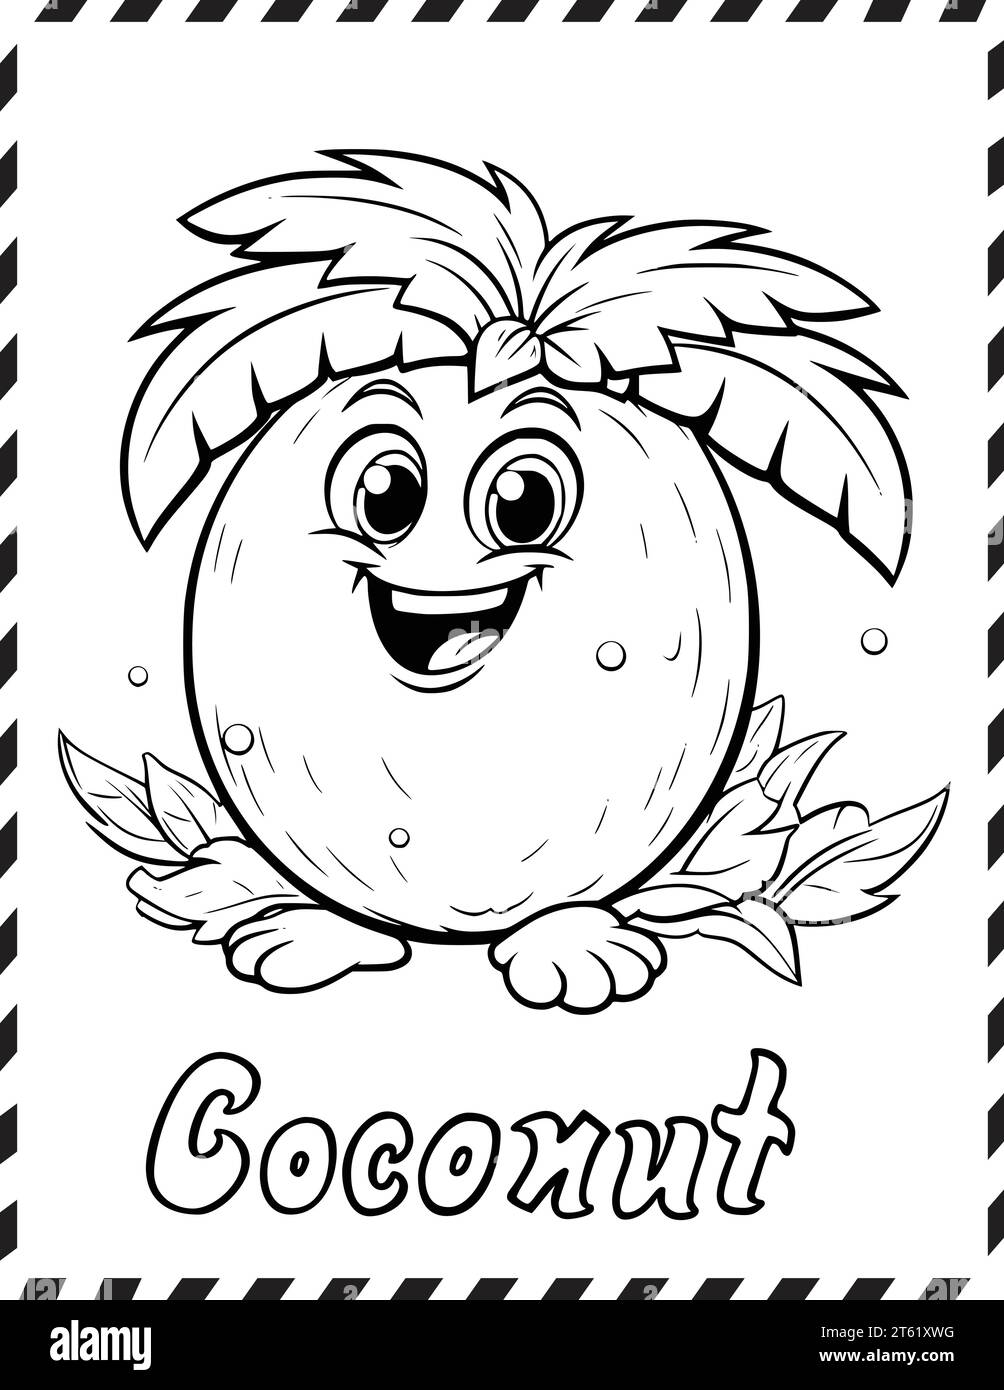 Coconut Coloring Page for Kids Stock Vector